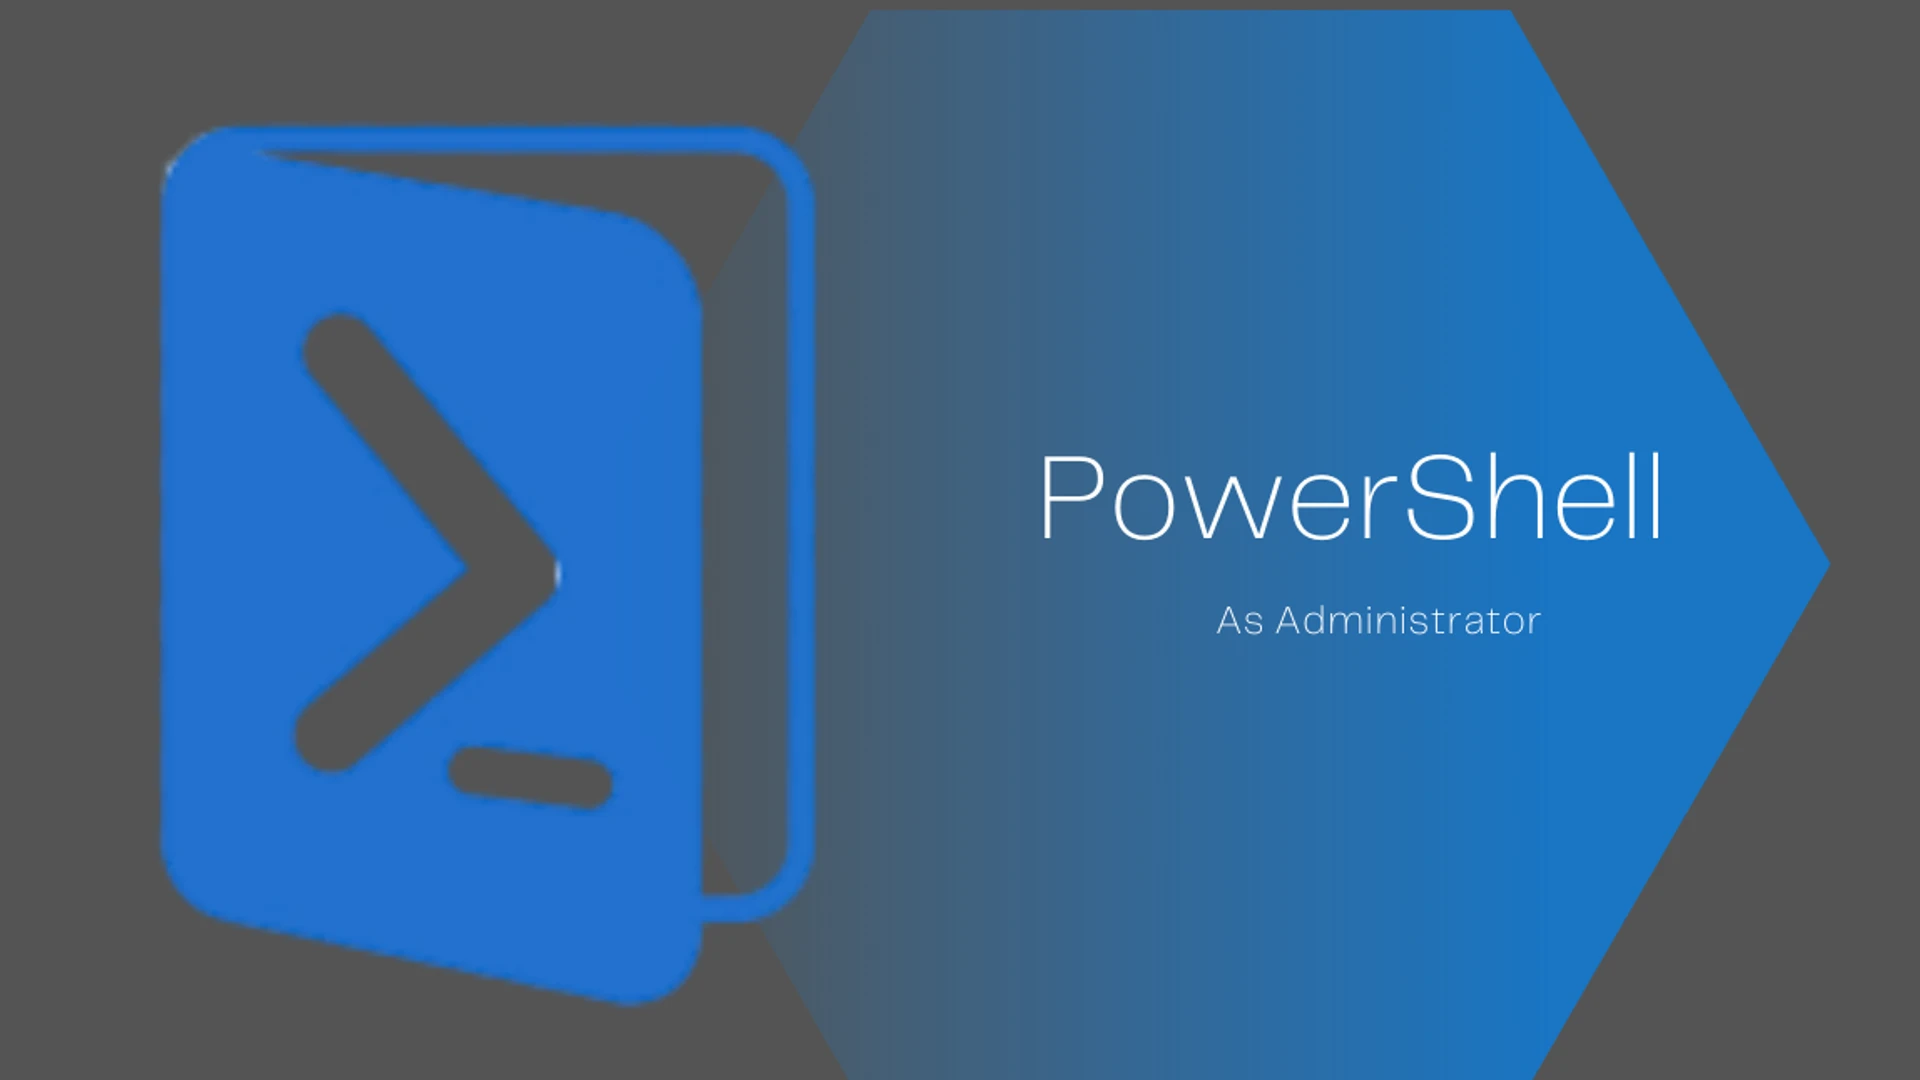 Implementing PowerShell to securing Windows systems; NSA shares a PDF